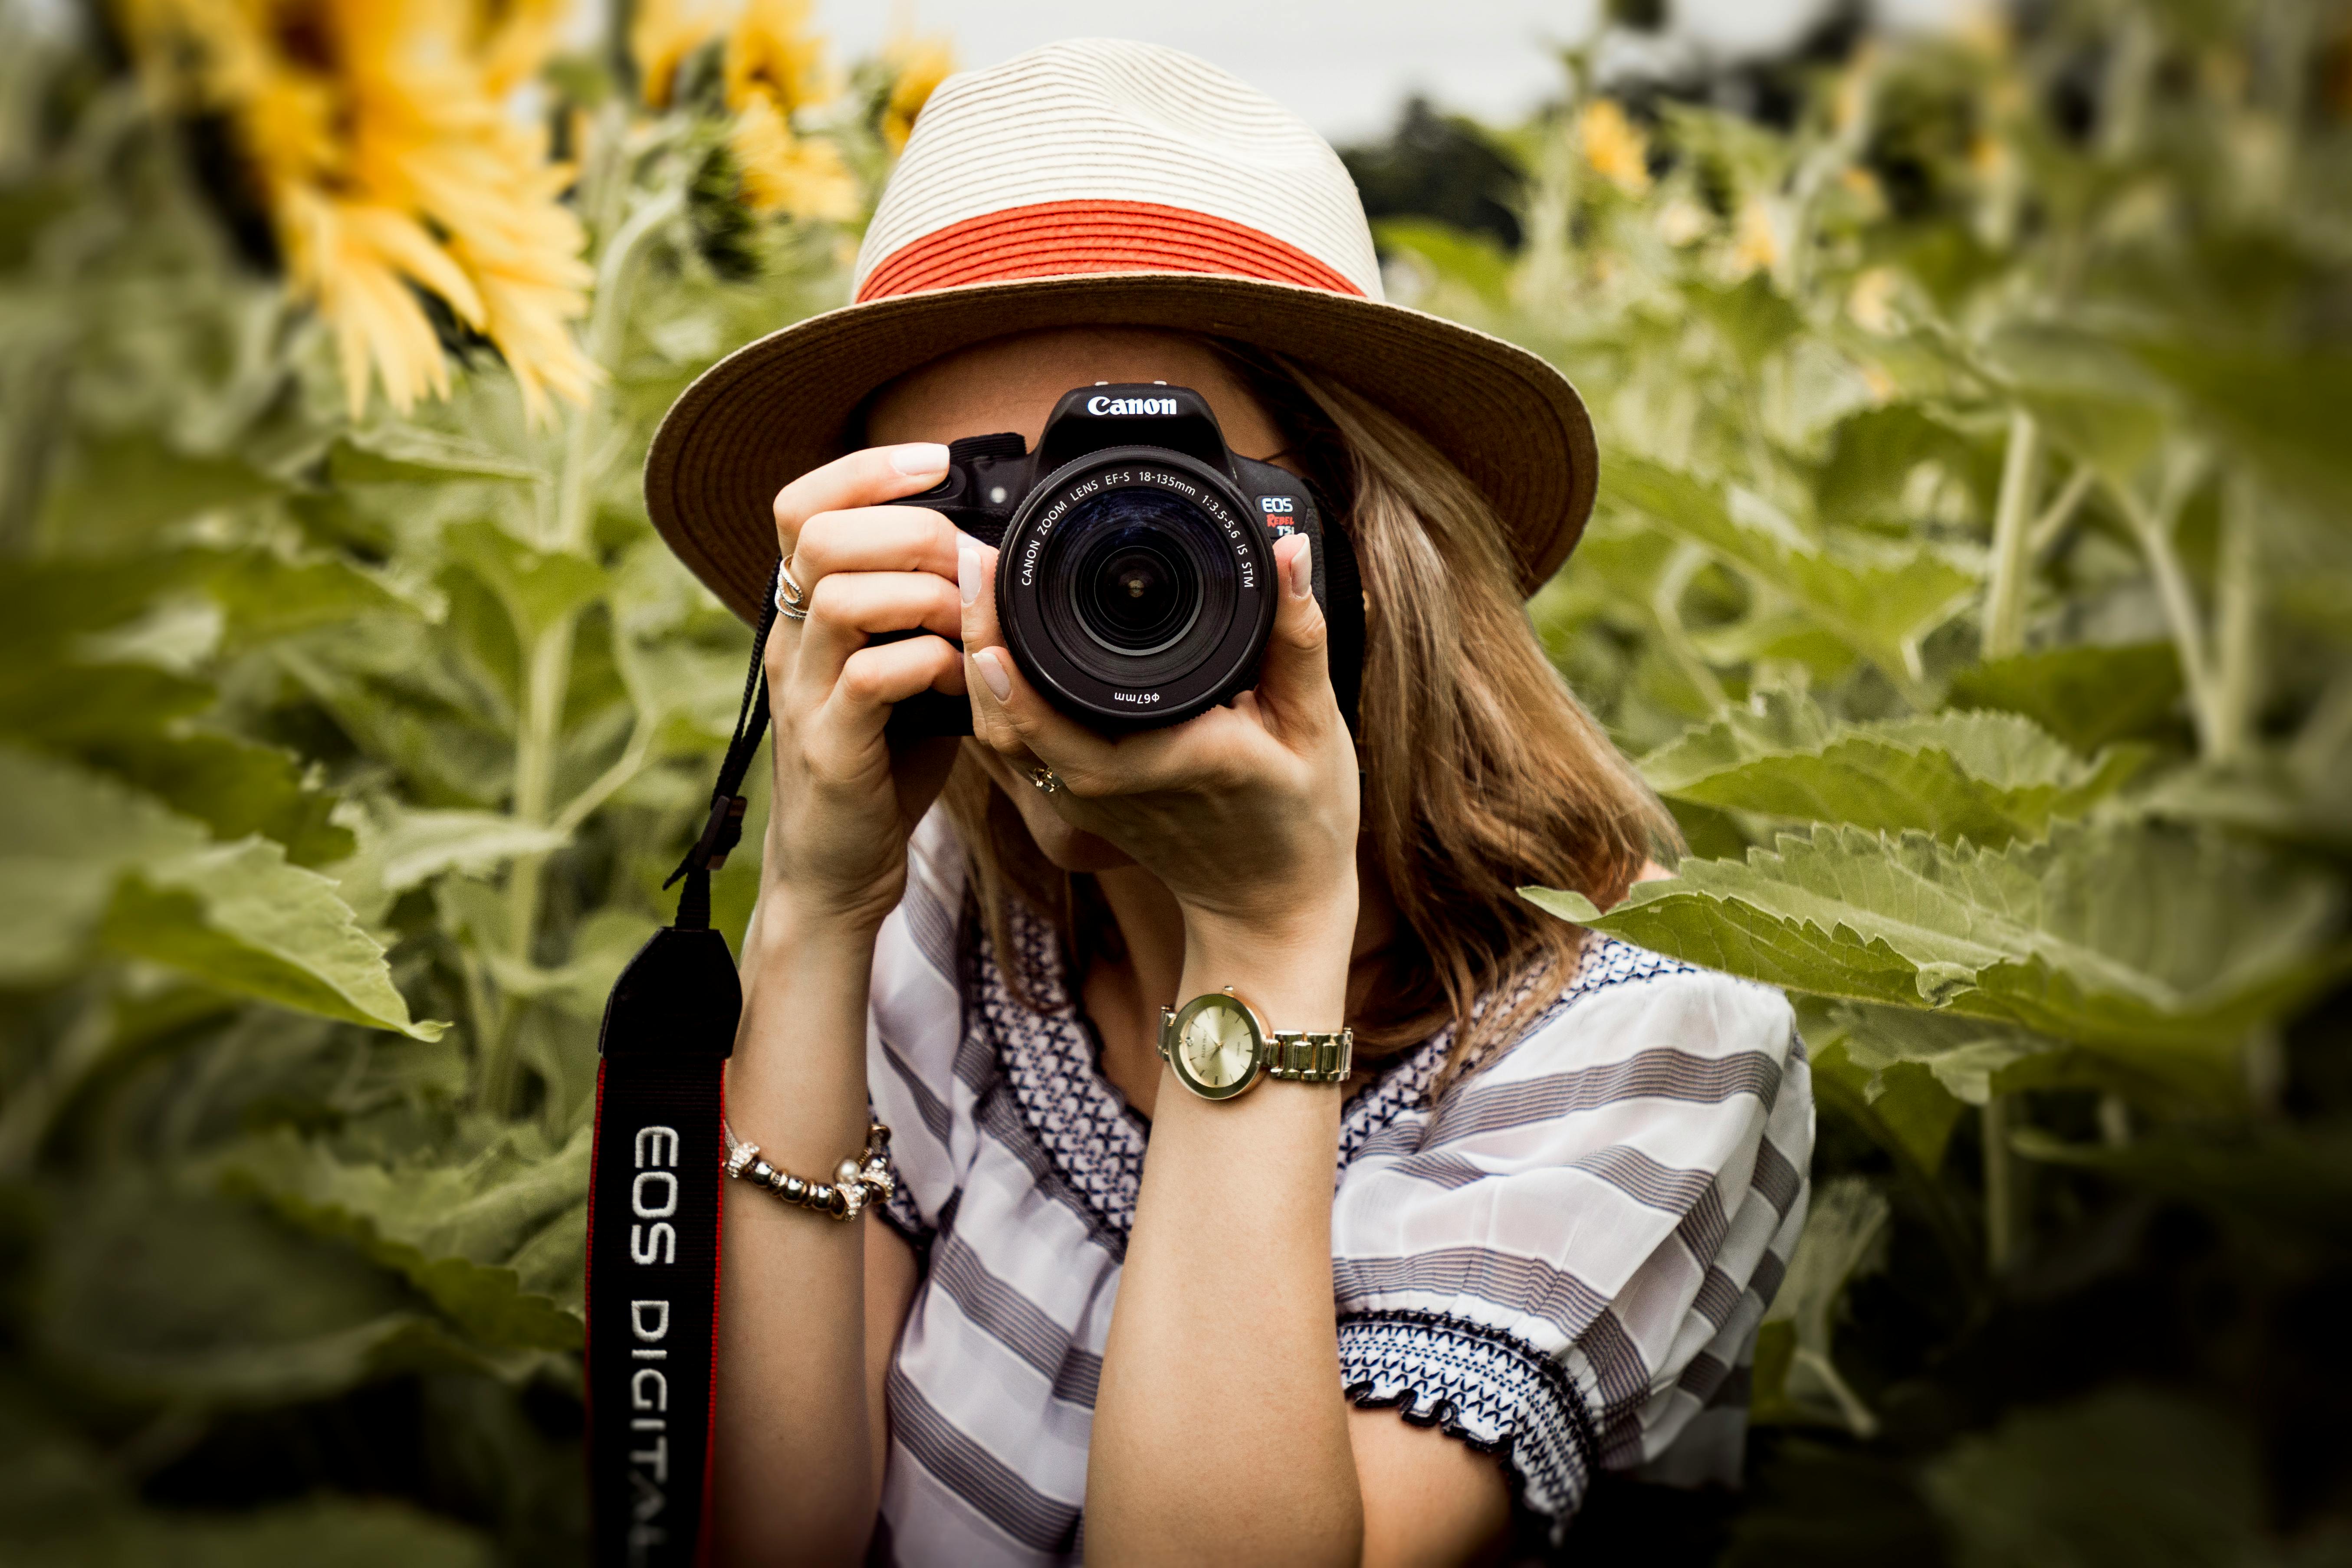 A woman with a camera | Source: Pexels